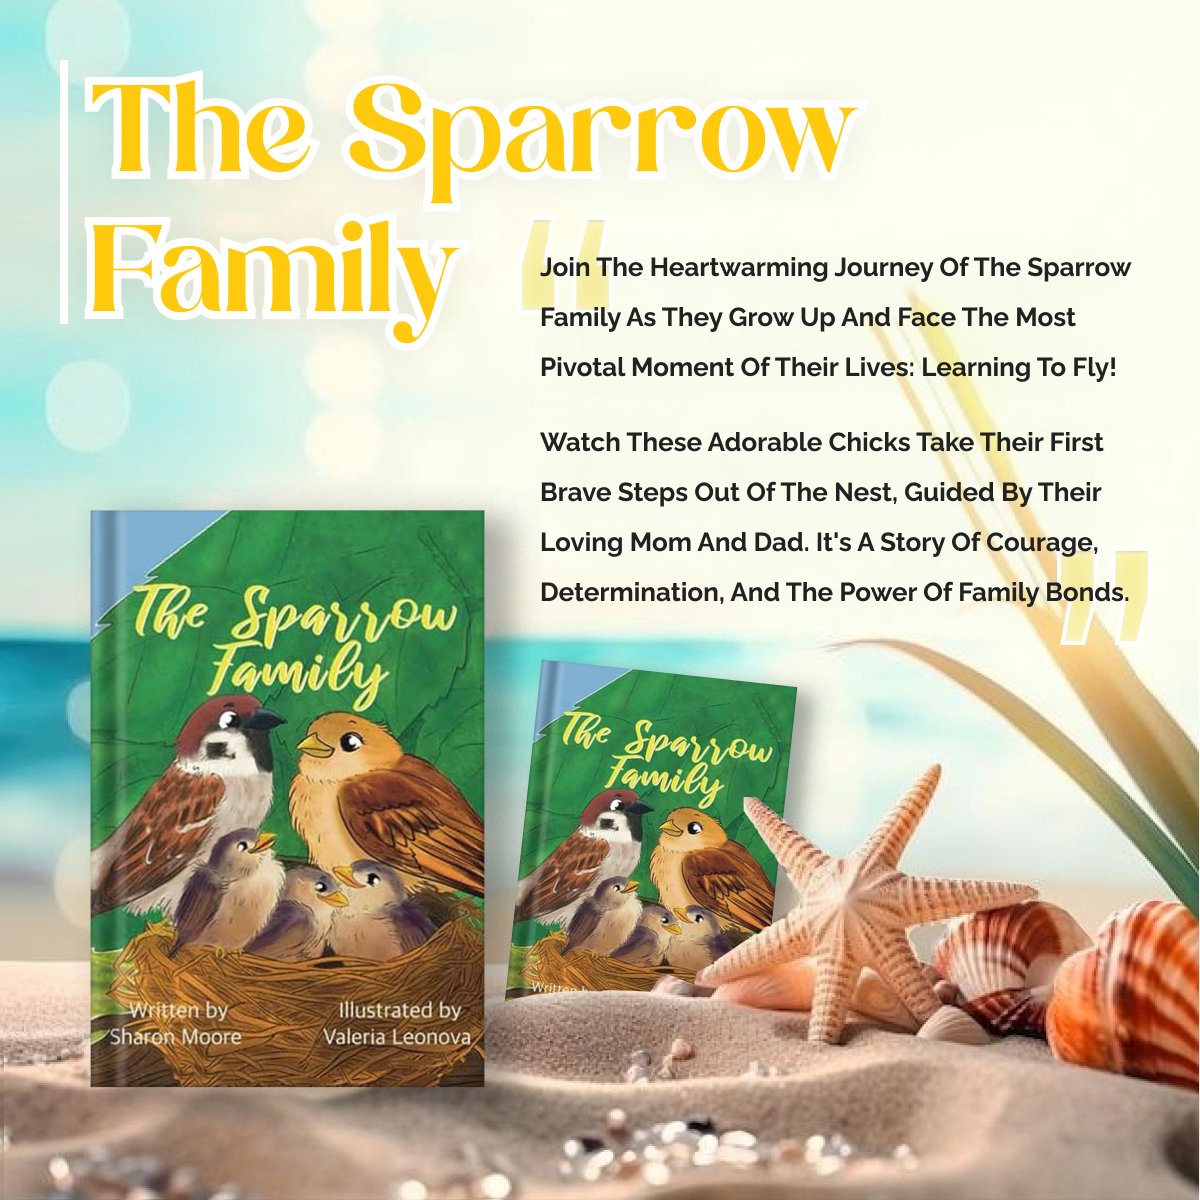 It's a story of courage, determination, and the power of family bonds.

linktr.ee/sharonmoorefun